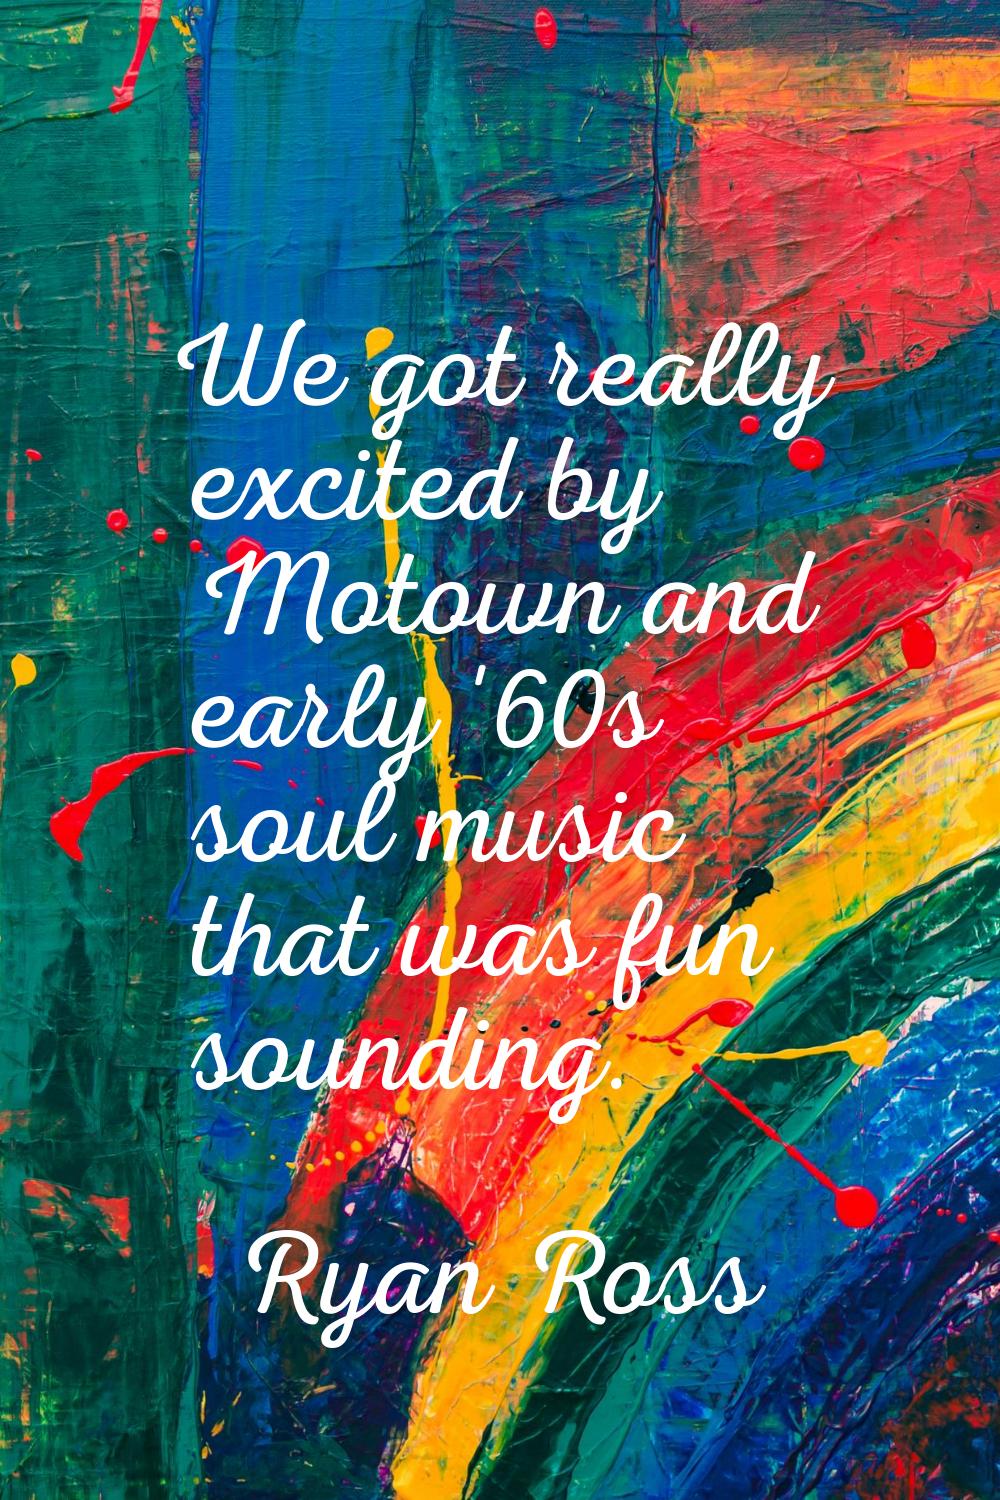 We got really excited by Motown and early '60s soul music that was fun sounding.